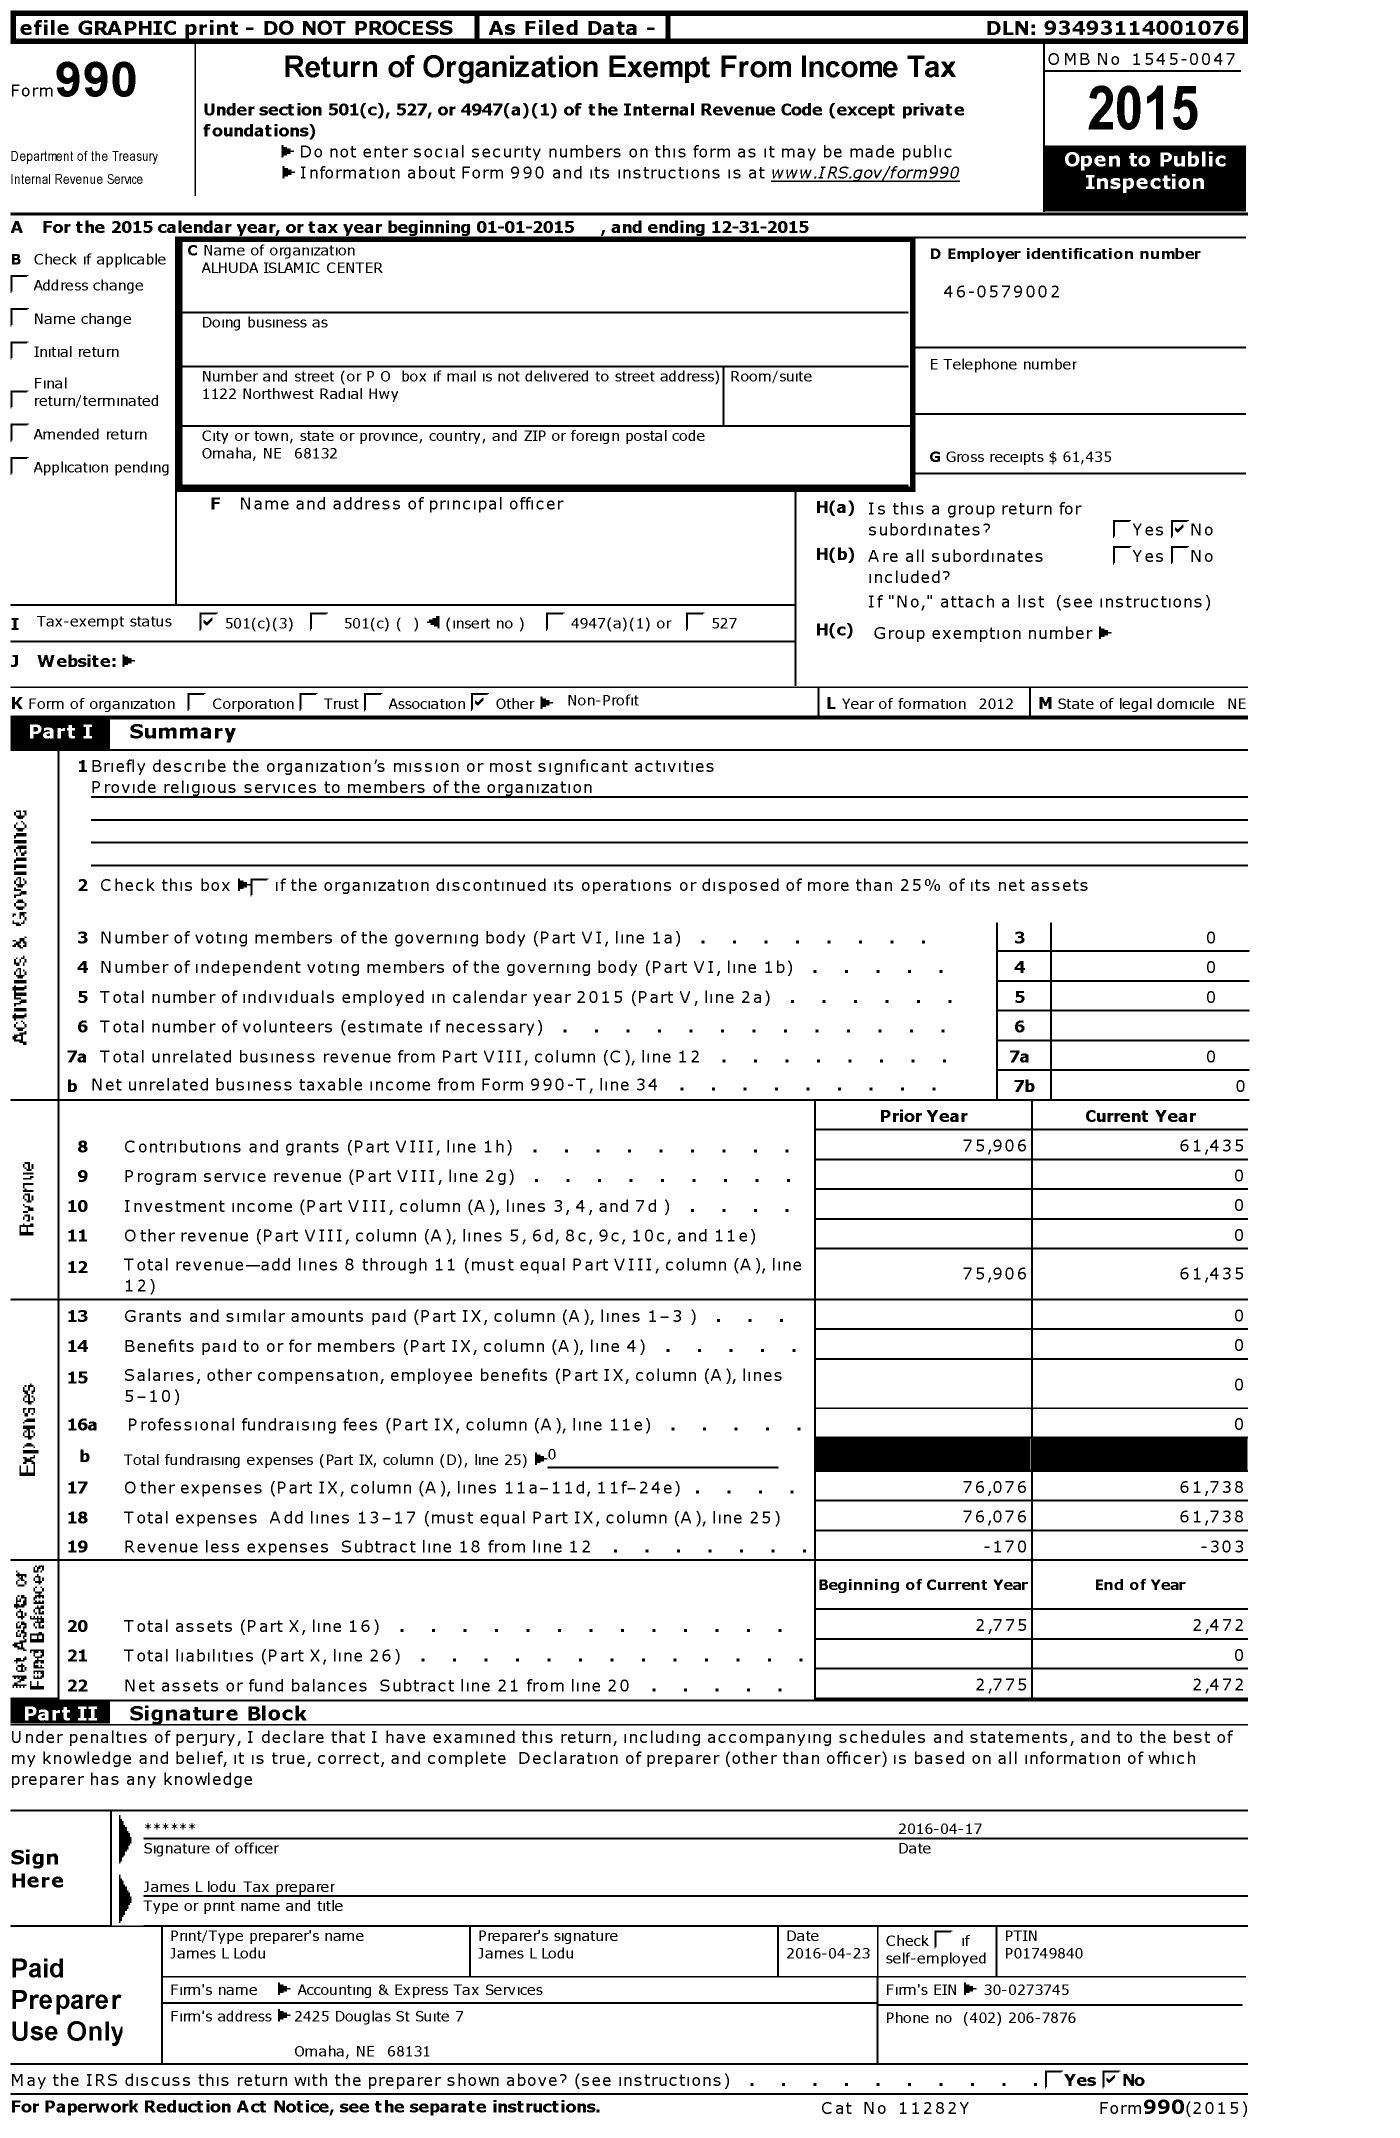 Image of first page of 2015 Form 990 for Alhuda Islamic Center